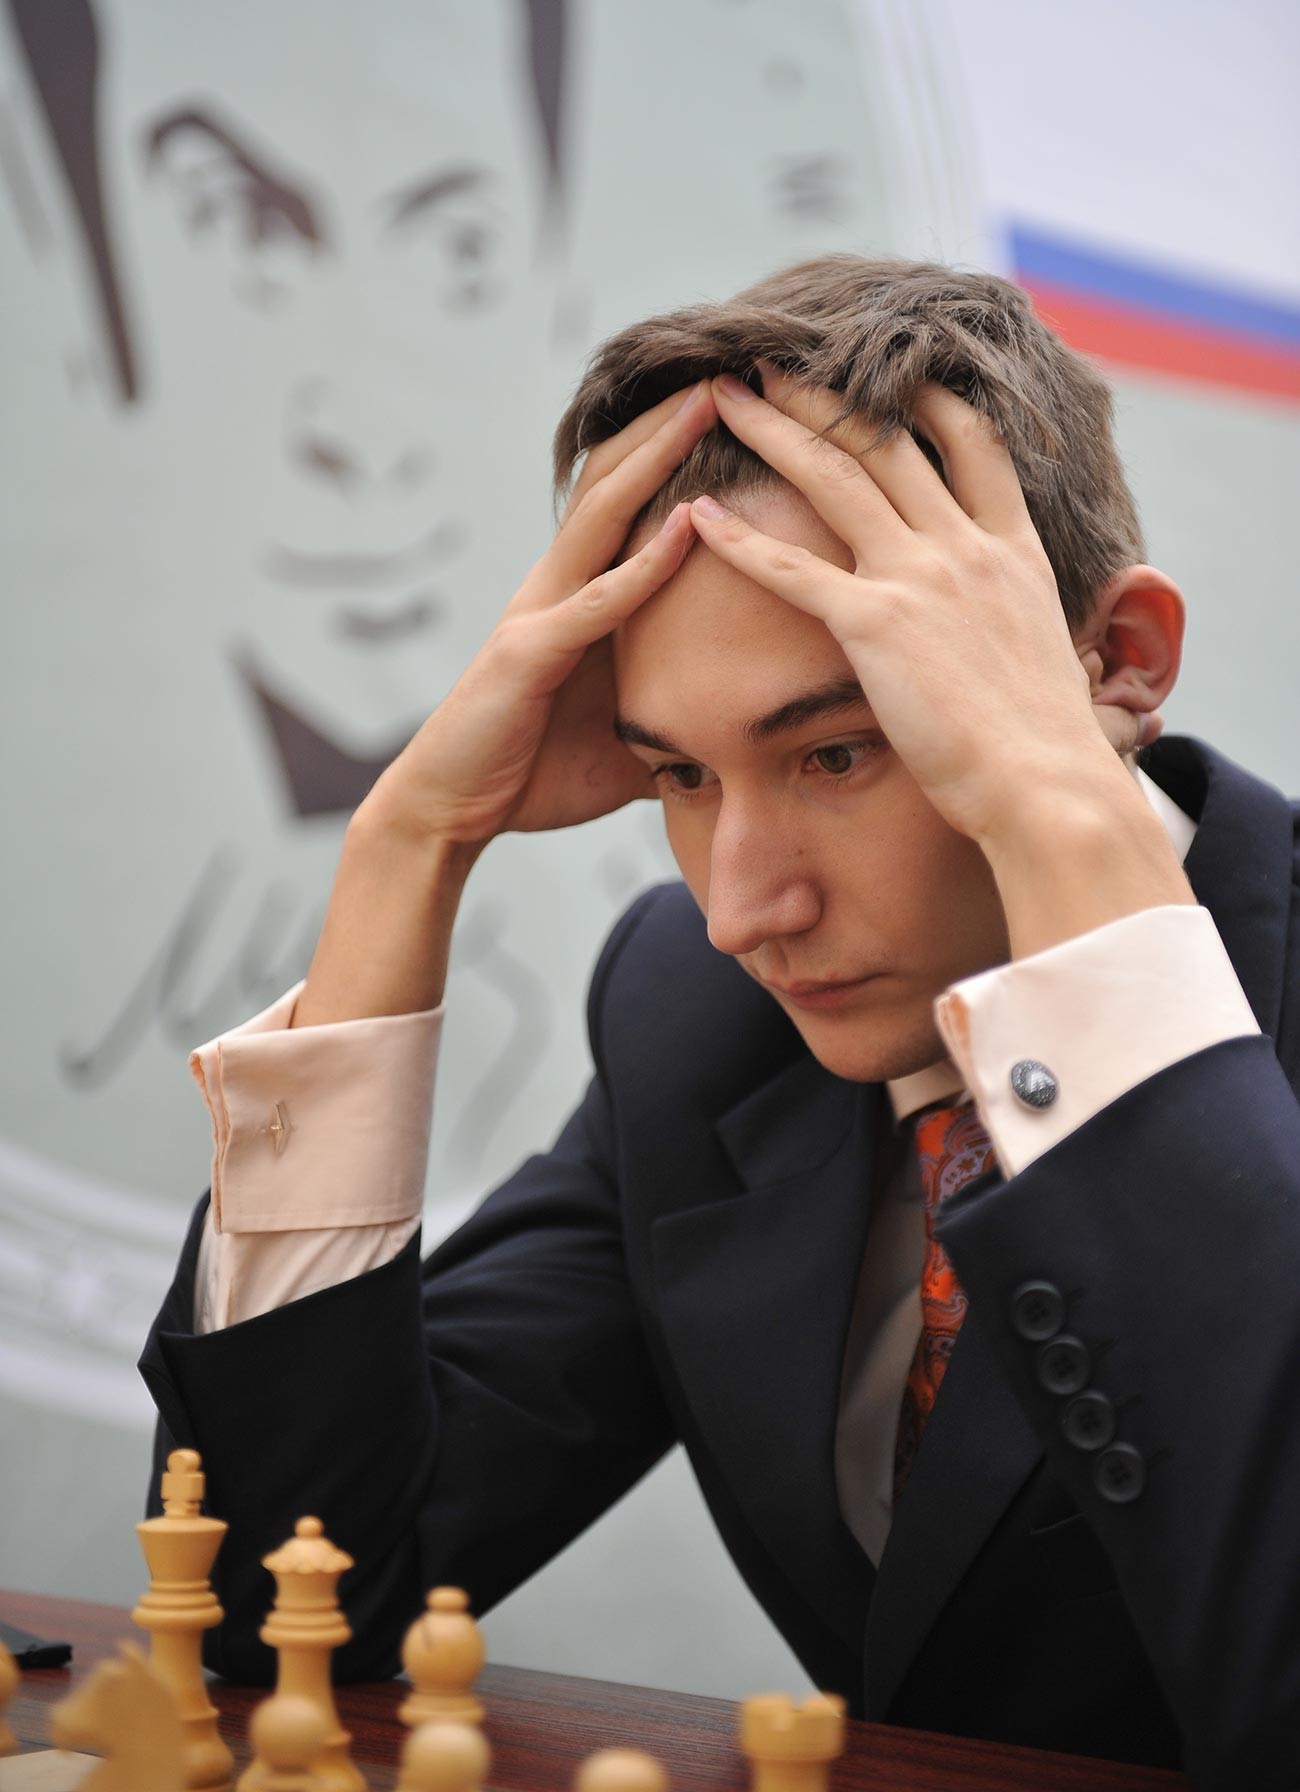 At 12, Karjakin entered the Guinness Book of World Record for becoming the youngest Grandmaster in history.